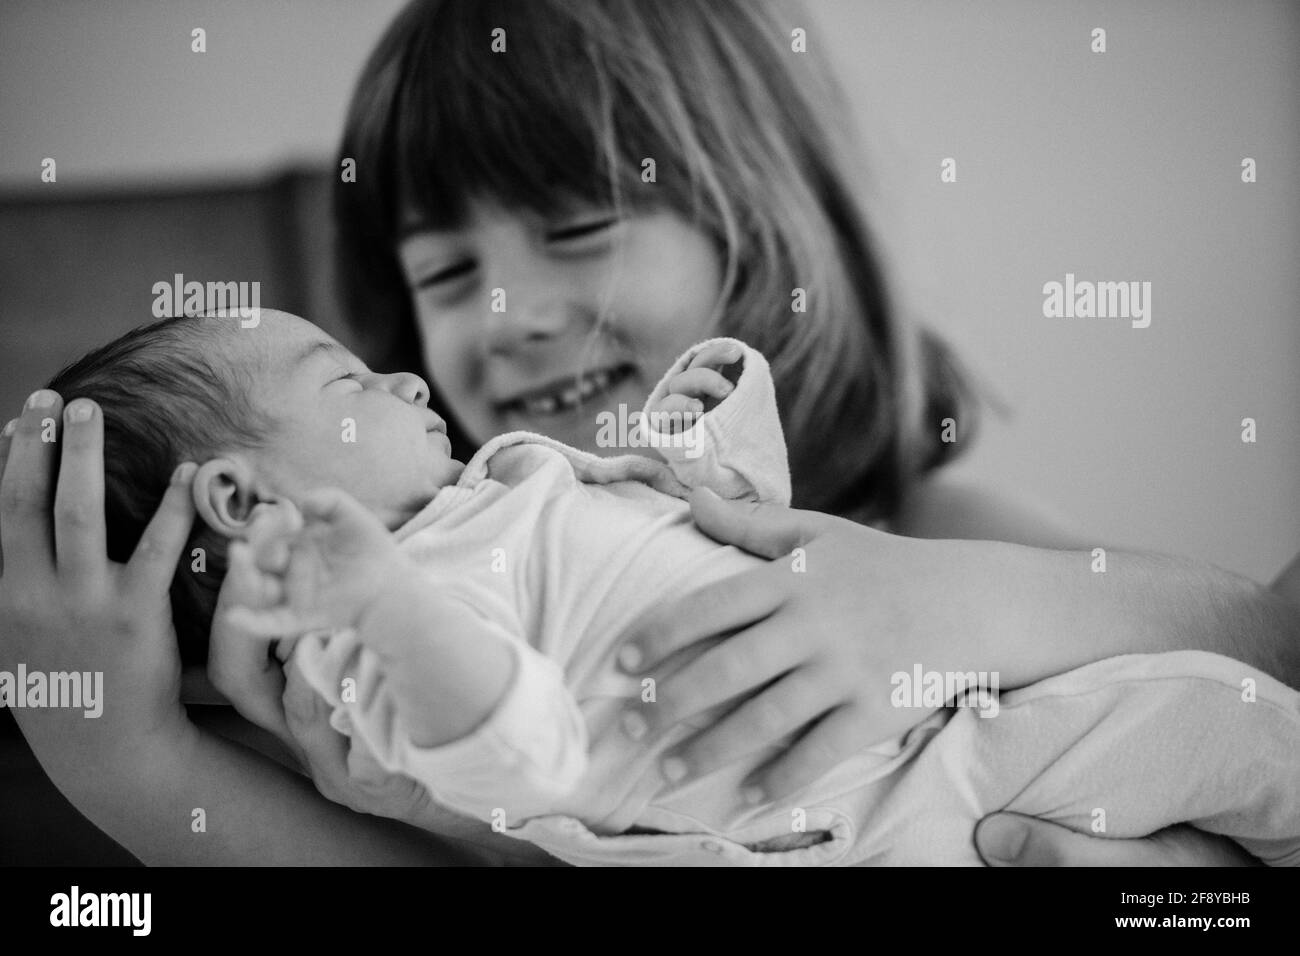 Portrait of sister with newborn baby Stock Photo